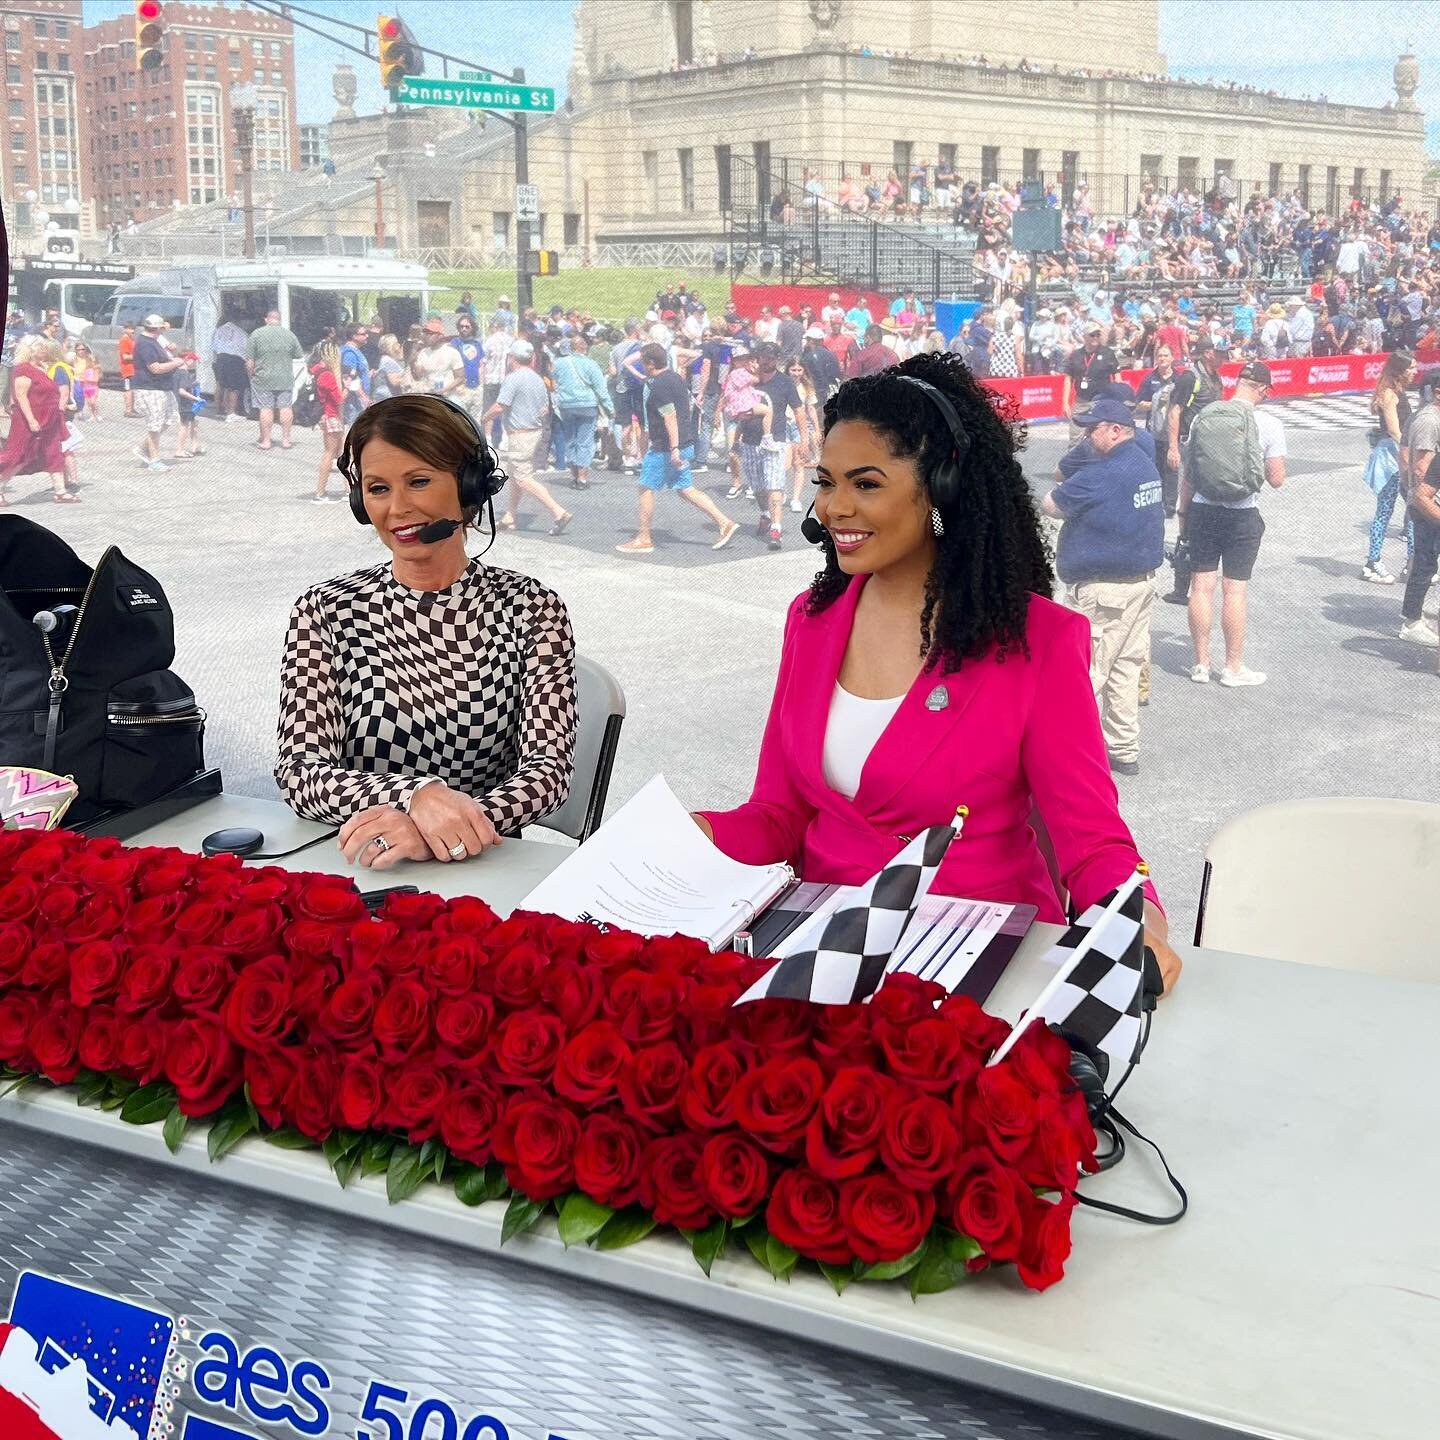 LIVE TV! Such a BEAUTIFUL day filled with great weather, excitement, and all things checkered! Race weekend is here! The city is electric! Our parade coverage is a massive undertaking! But thanks to DOZENS of crew members, many not shown in these few